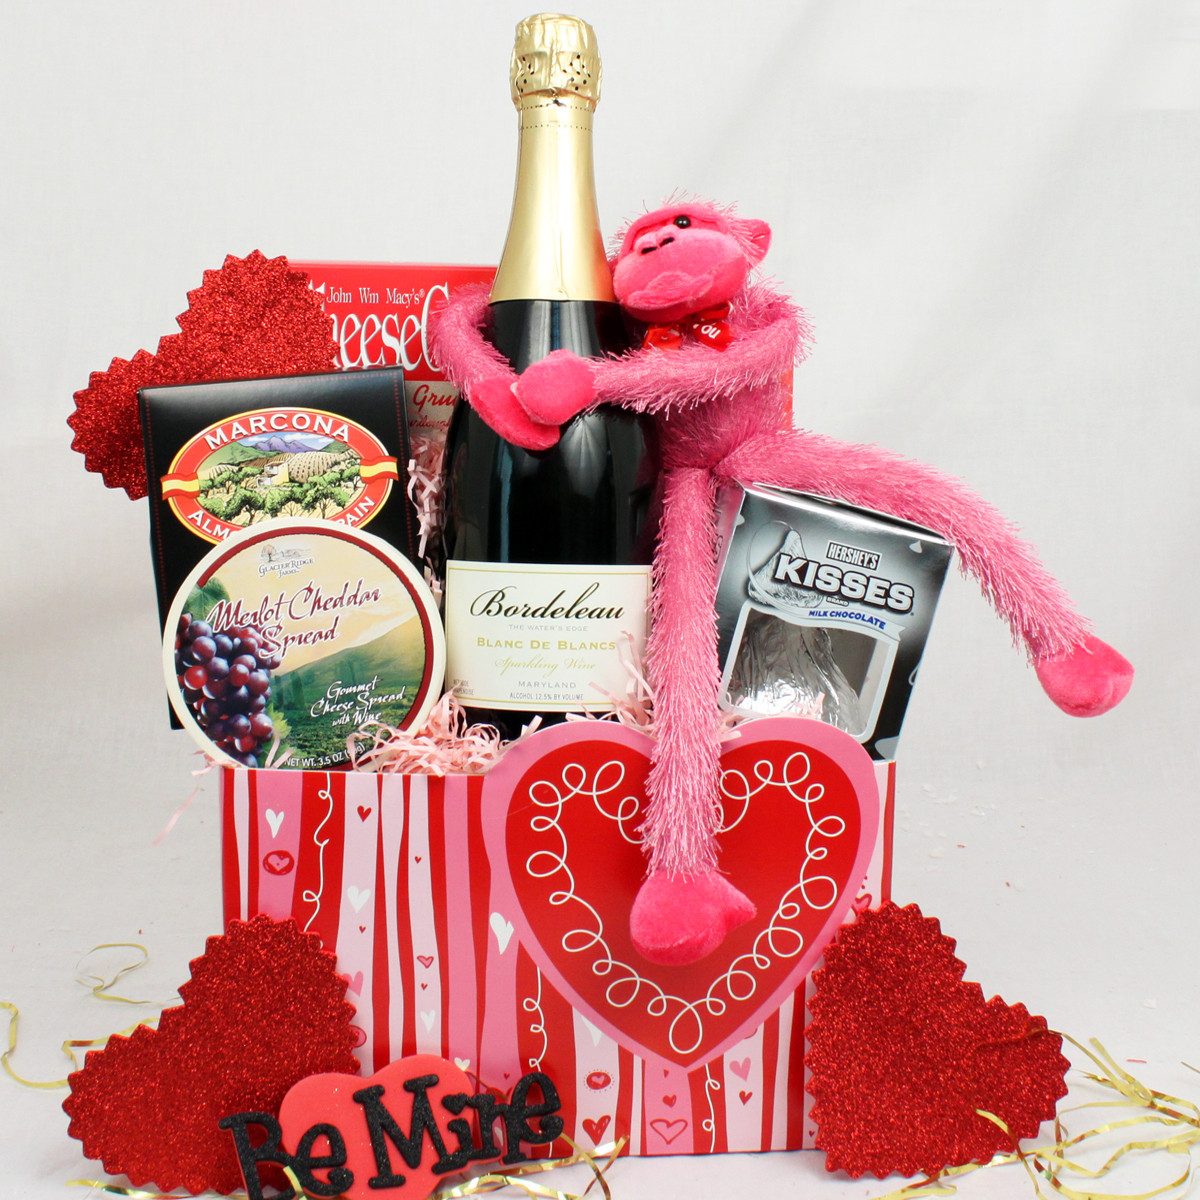 Valentines Day Creative Gift Ideas
 Creative and Thoughtful Valentine’s Day Gifts for Her